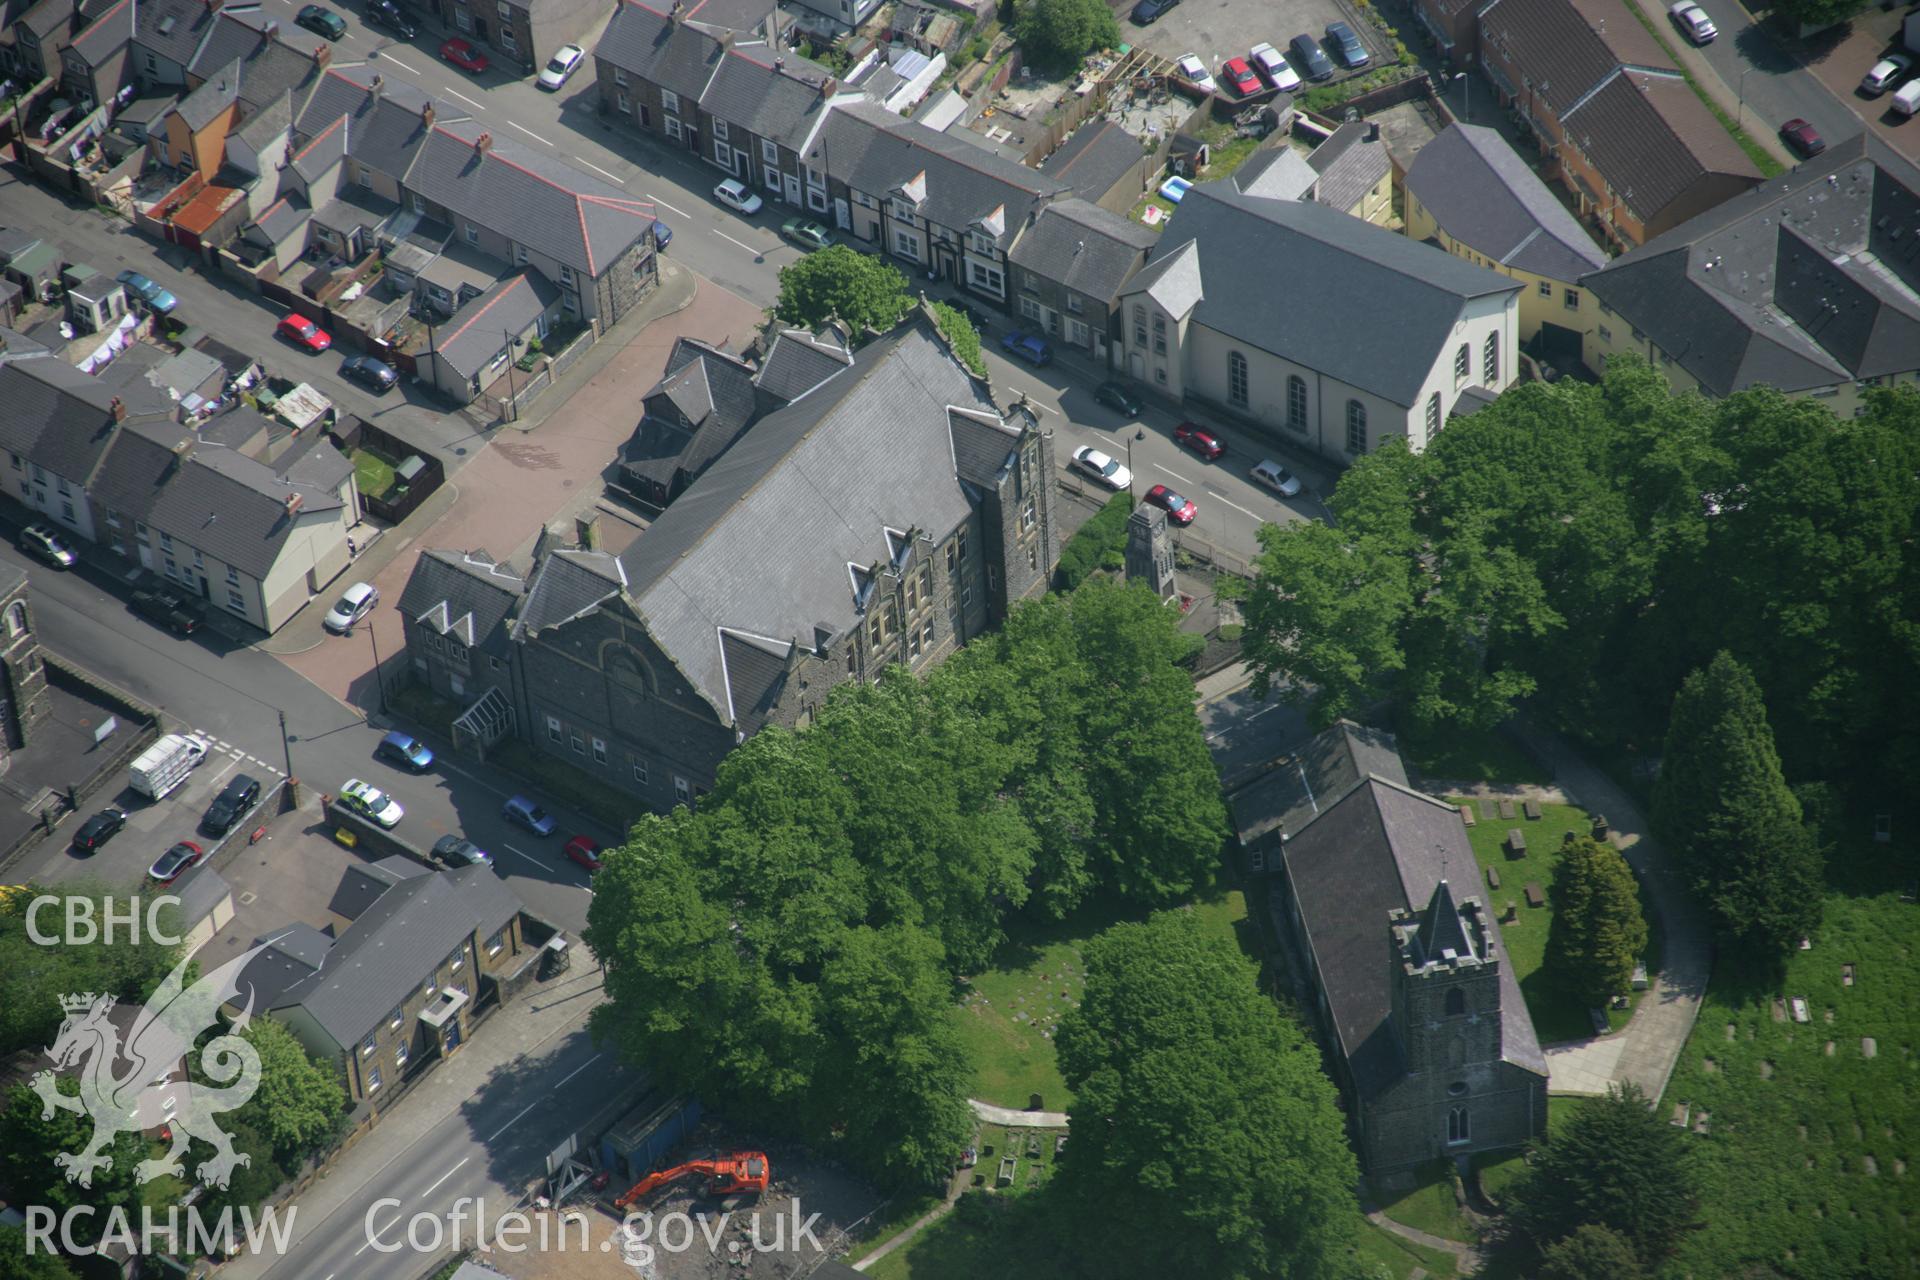 RCAHMW colour oblique aerial photograph of Blaenavon Workingmens' Hall and Institute from the south-west. Taken on 09 June 2006 by Toby Driver.